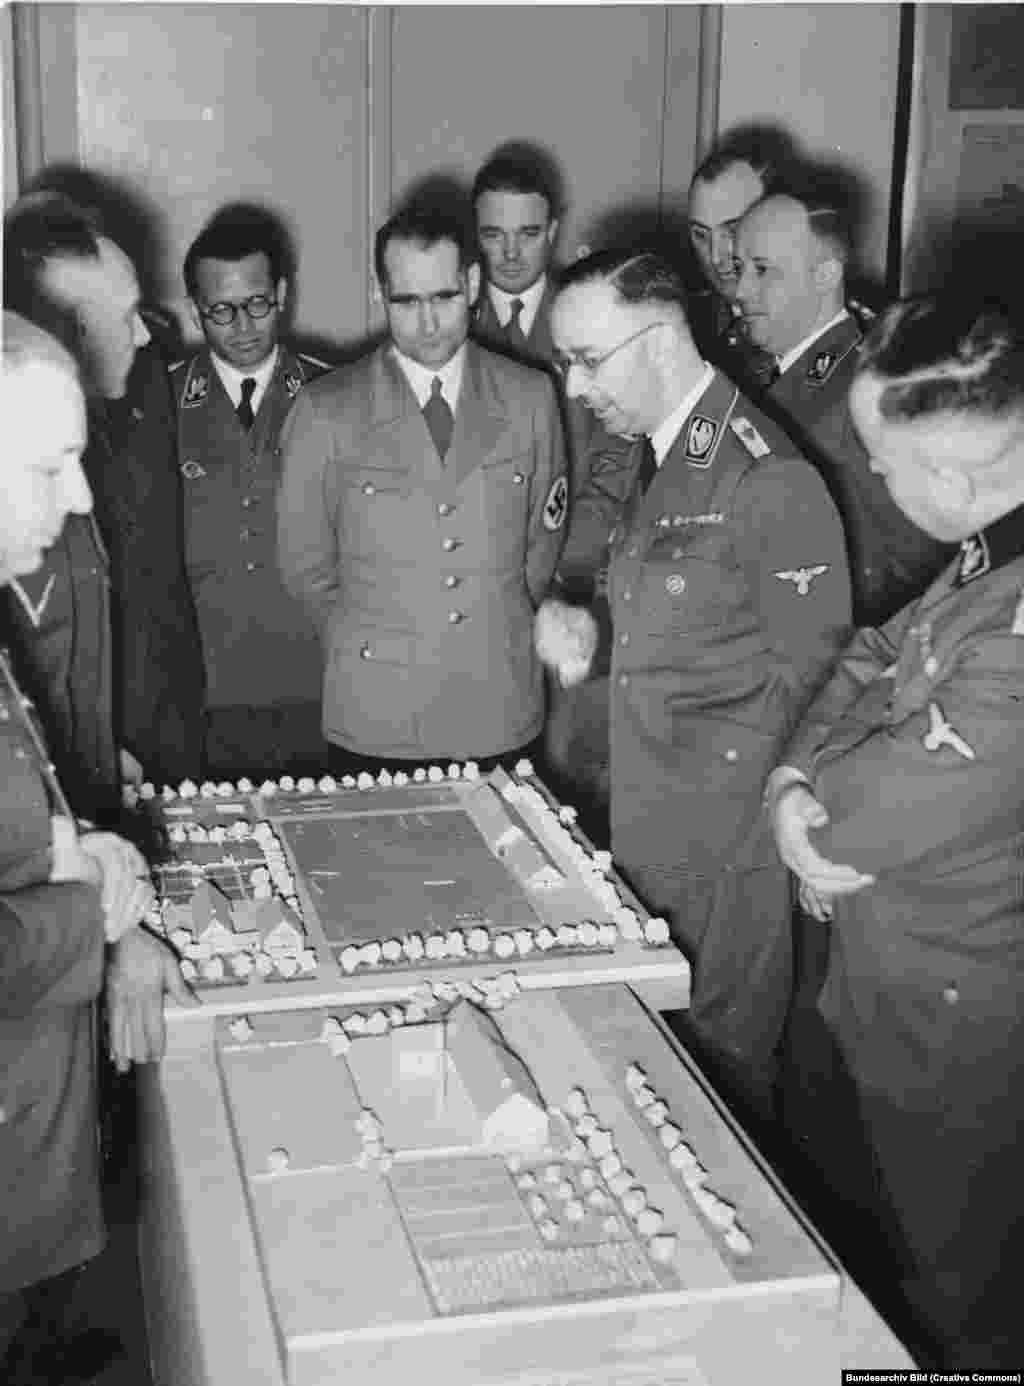 Heinrich Himmler and other senior Nazis look at a plan for ethnic German rural settlements on Soviet territory in March 1941. &nbsp; &nbsp; The invasion had been years in the making, and was hinted at in Nazi leader Adolf Hitler&rsquo;s 1925 manifesto Mein Kampf when he wrote, &quot;If we talk about new soil and territory in Europe today, we can think primarily only of Russia and its vassal border states.&quot;